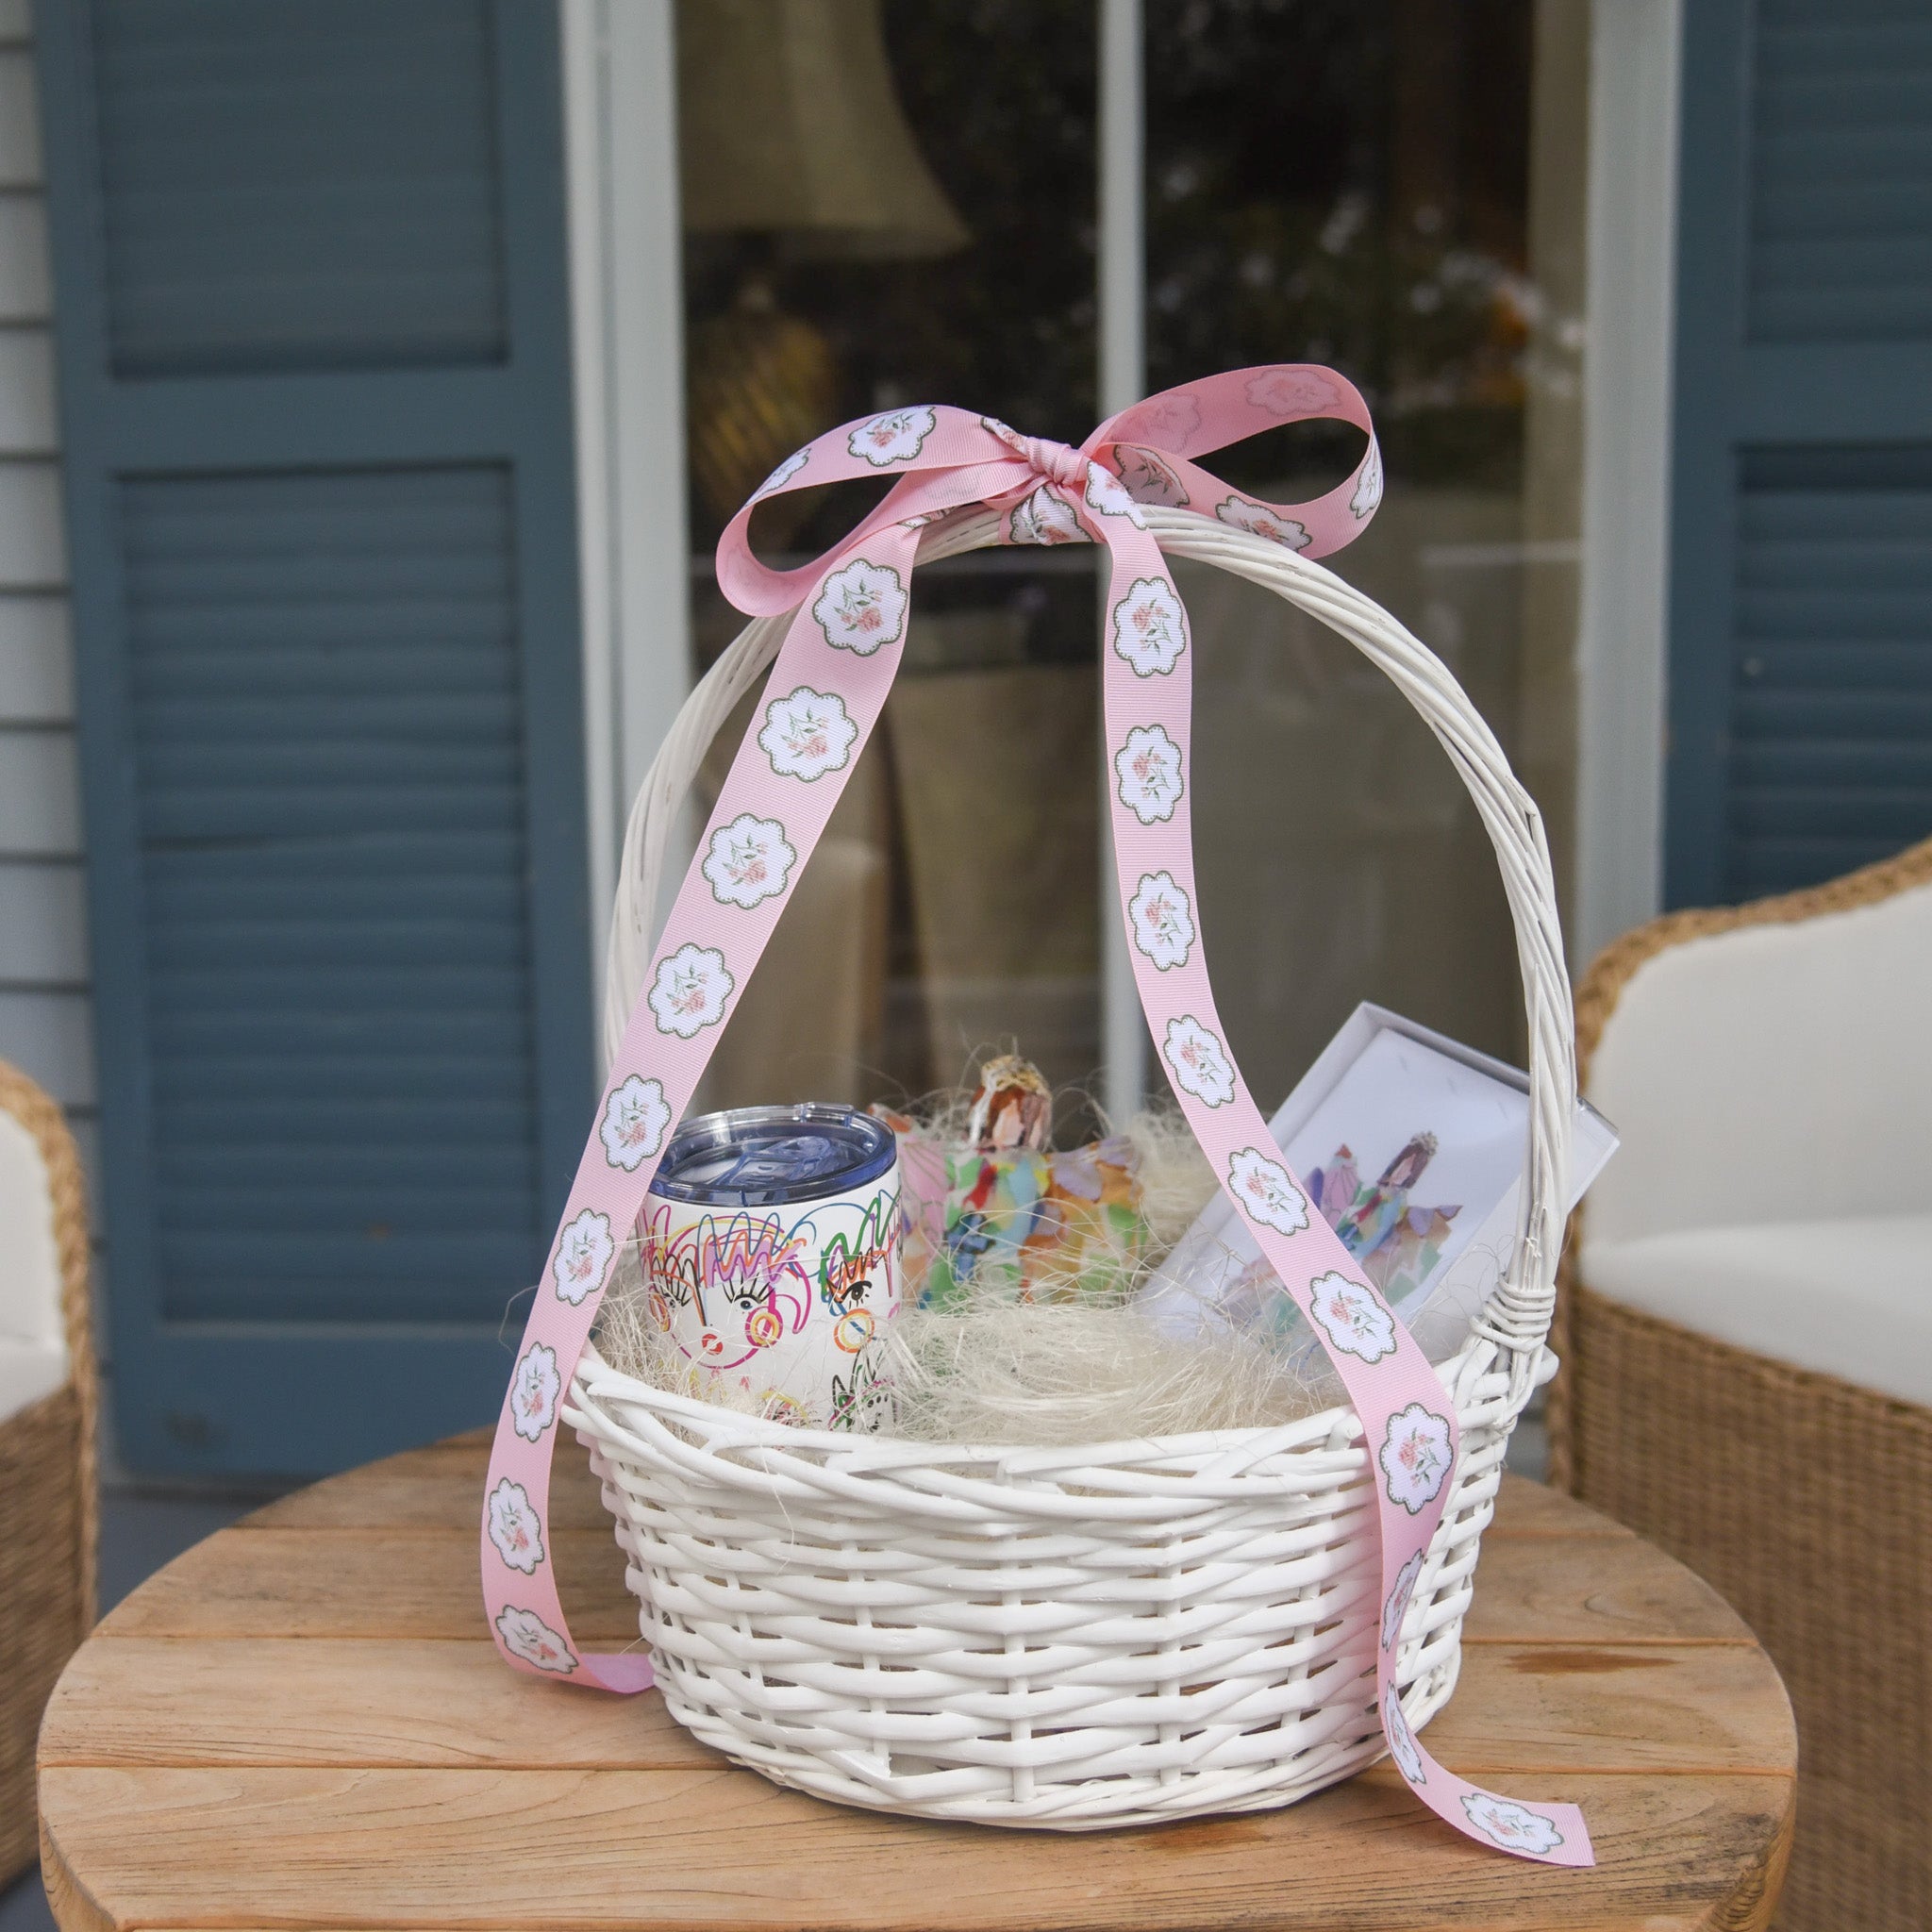 Small wicker basket - Curated